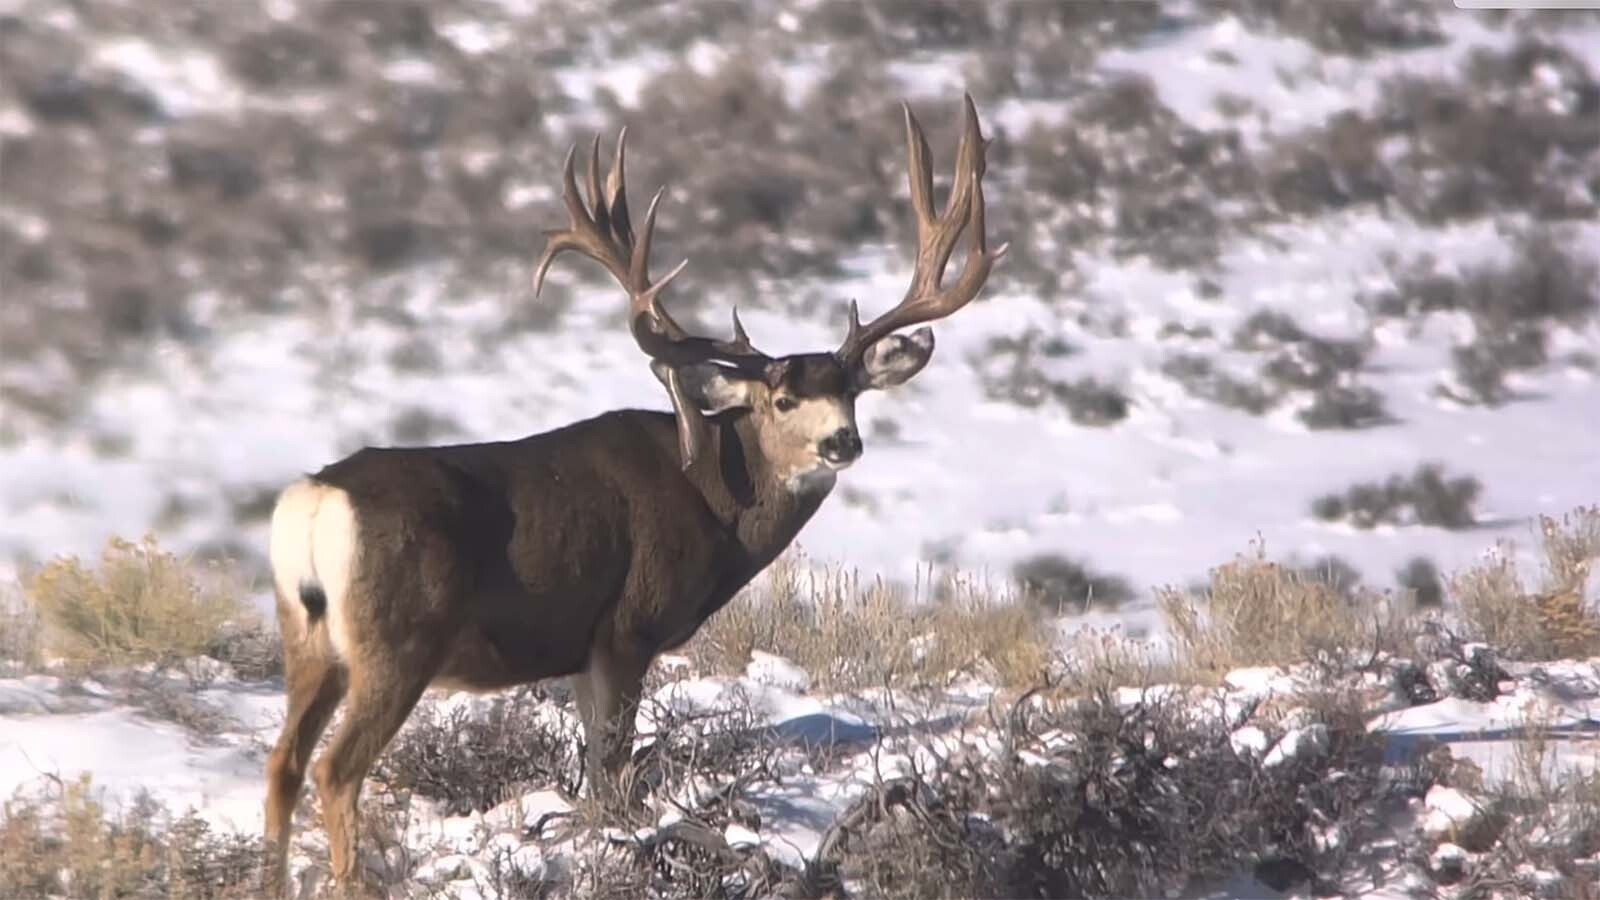 The King is a distinctive, and huge, Wyoming mule deer that's usually evasive during summers and fall. It's not known if he survived this past winter, which was brutal for big game winterkill.